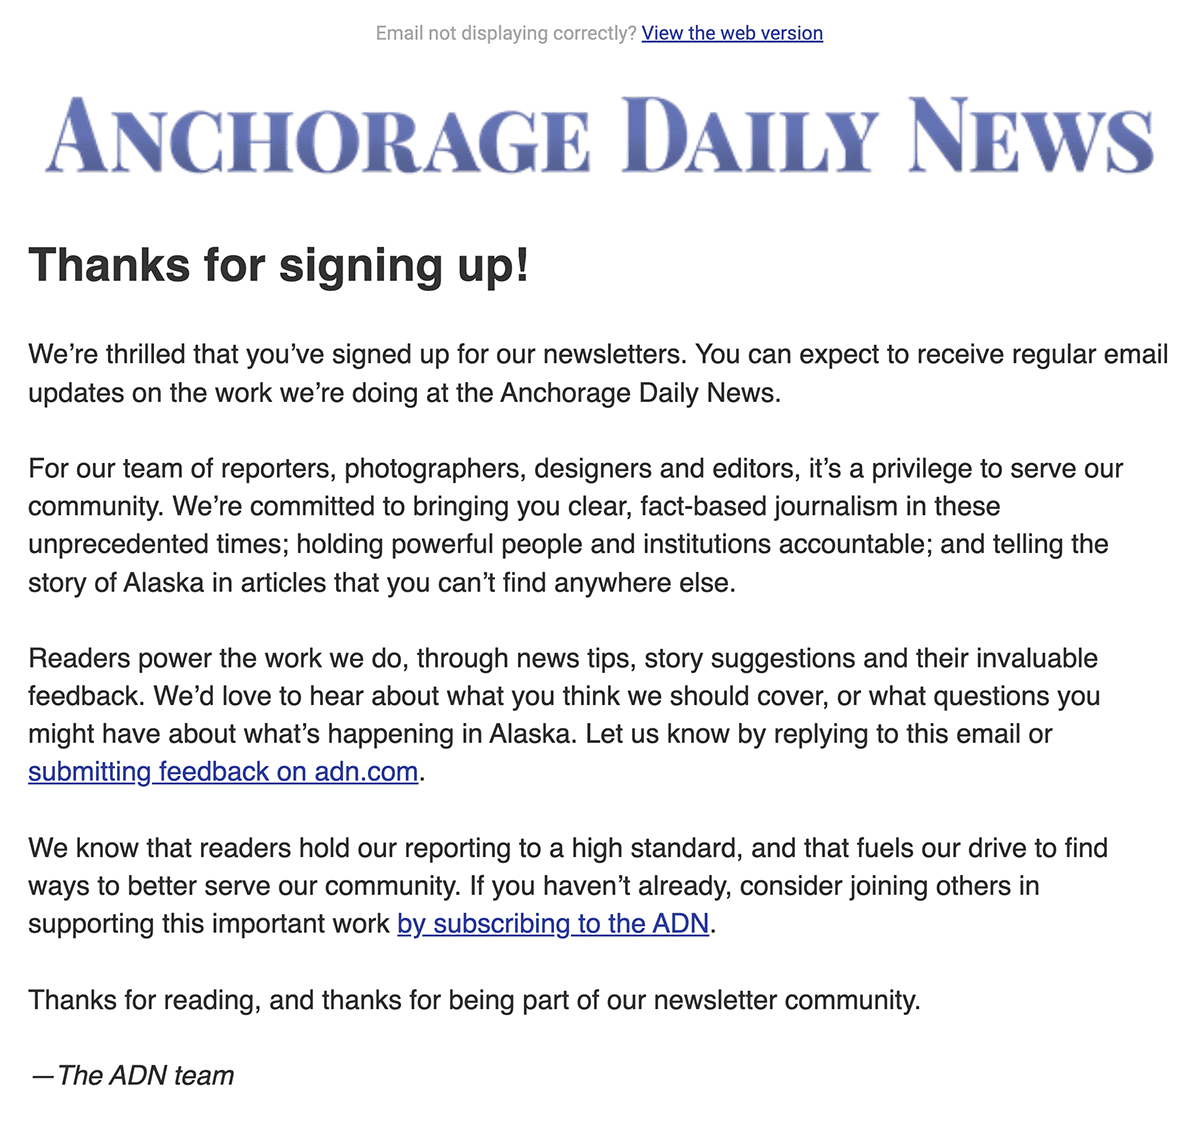 Anchorage Daily News Welcome Email 2022